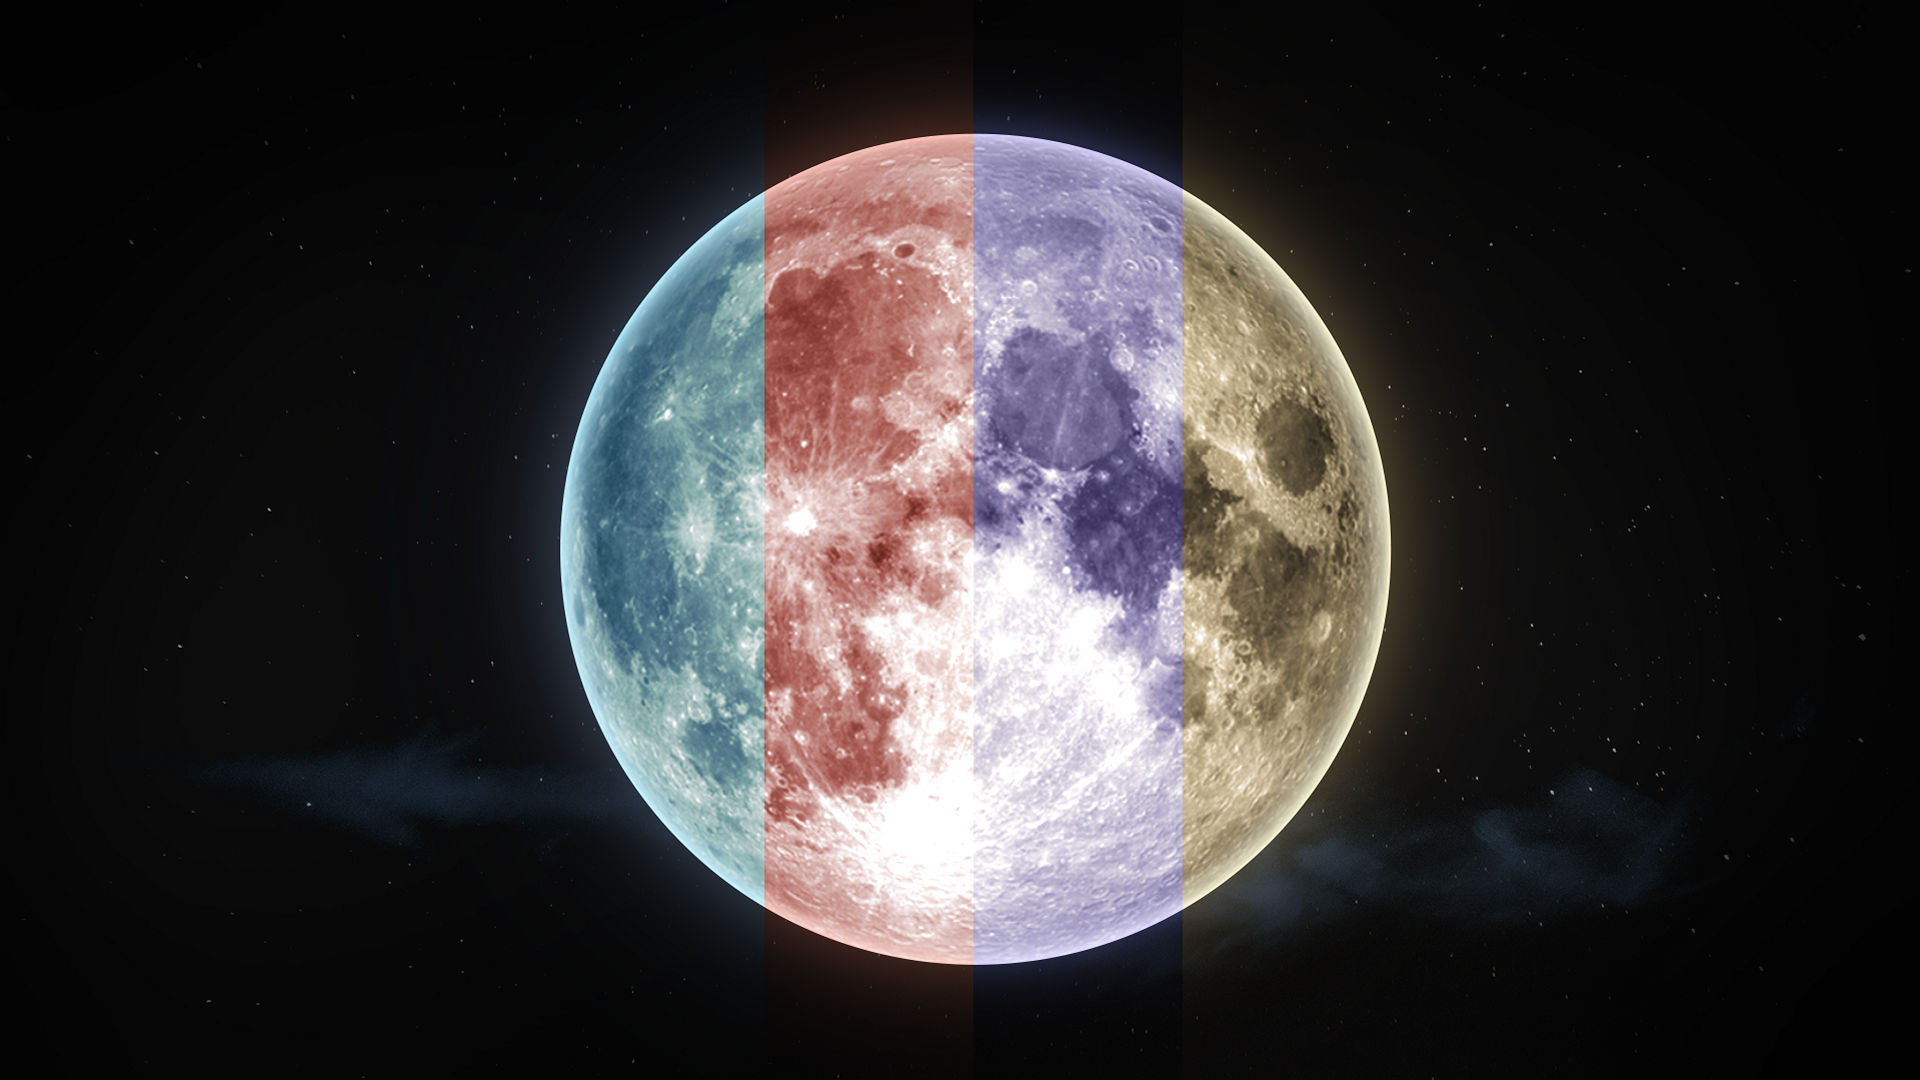 Artist’s representation of the Moon’s different colors